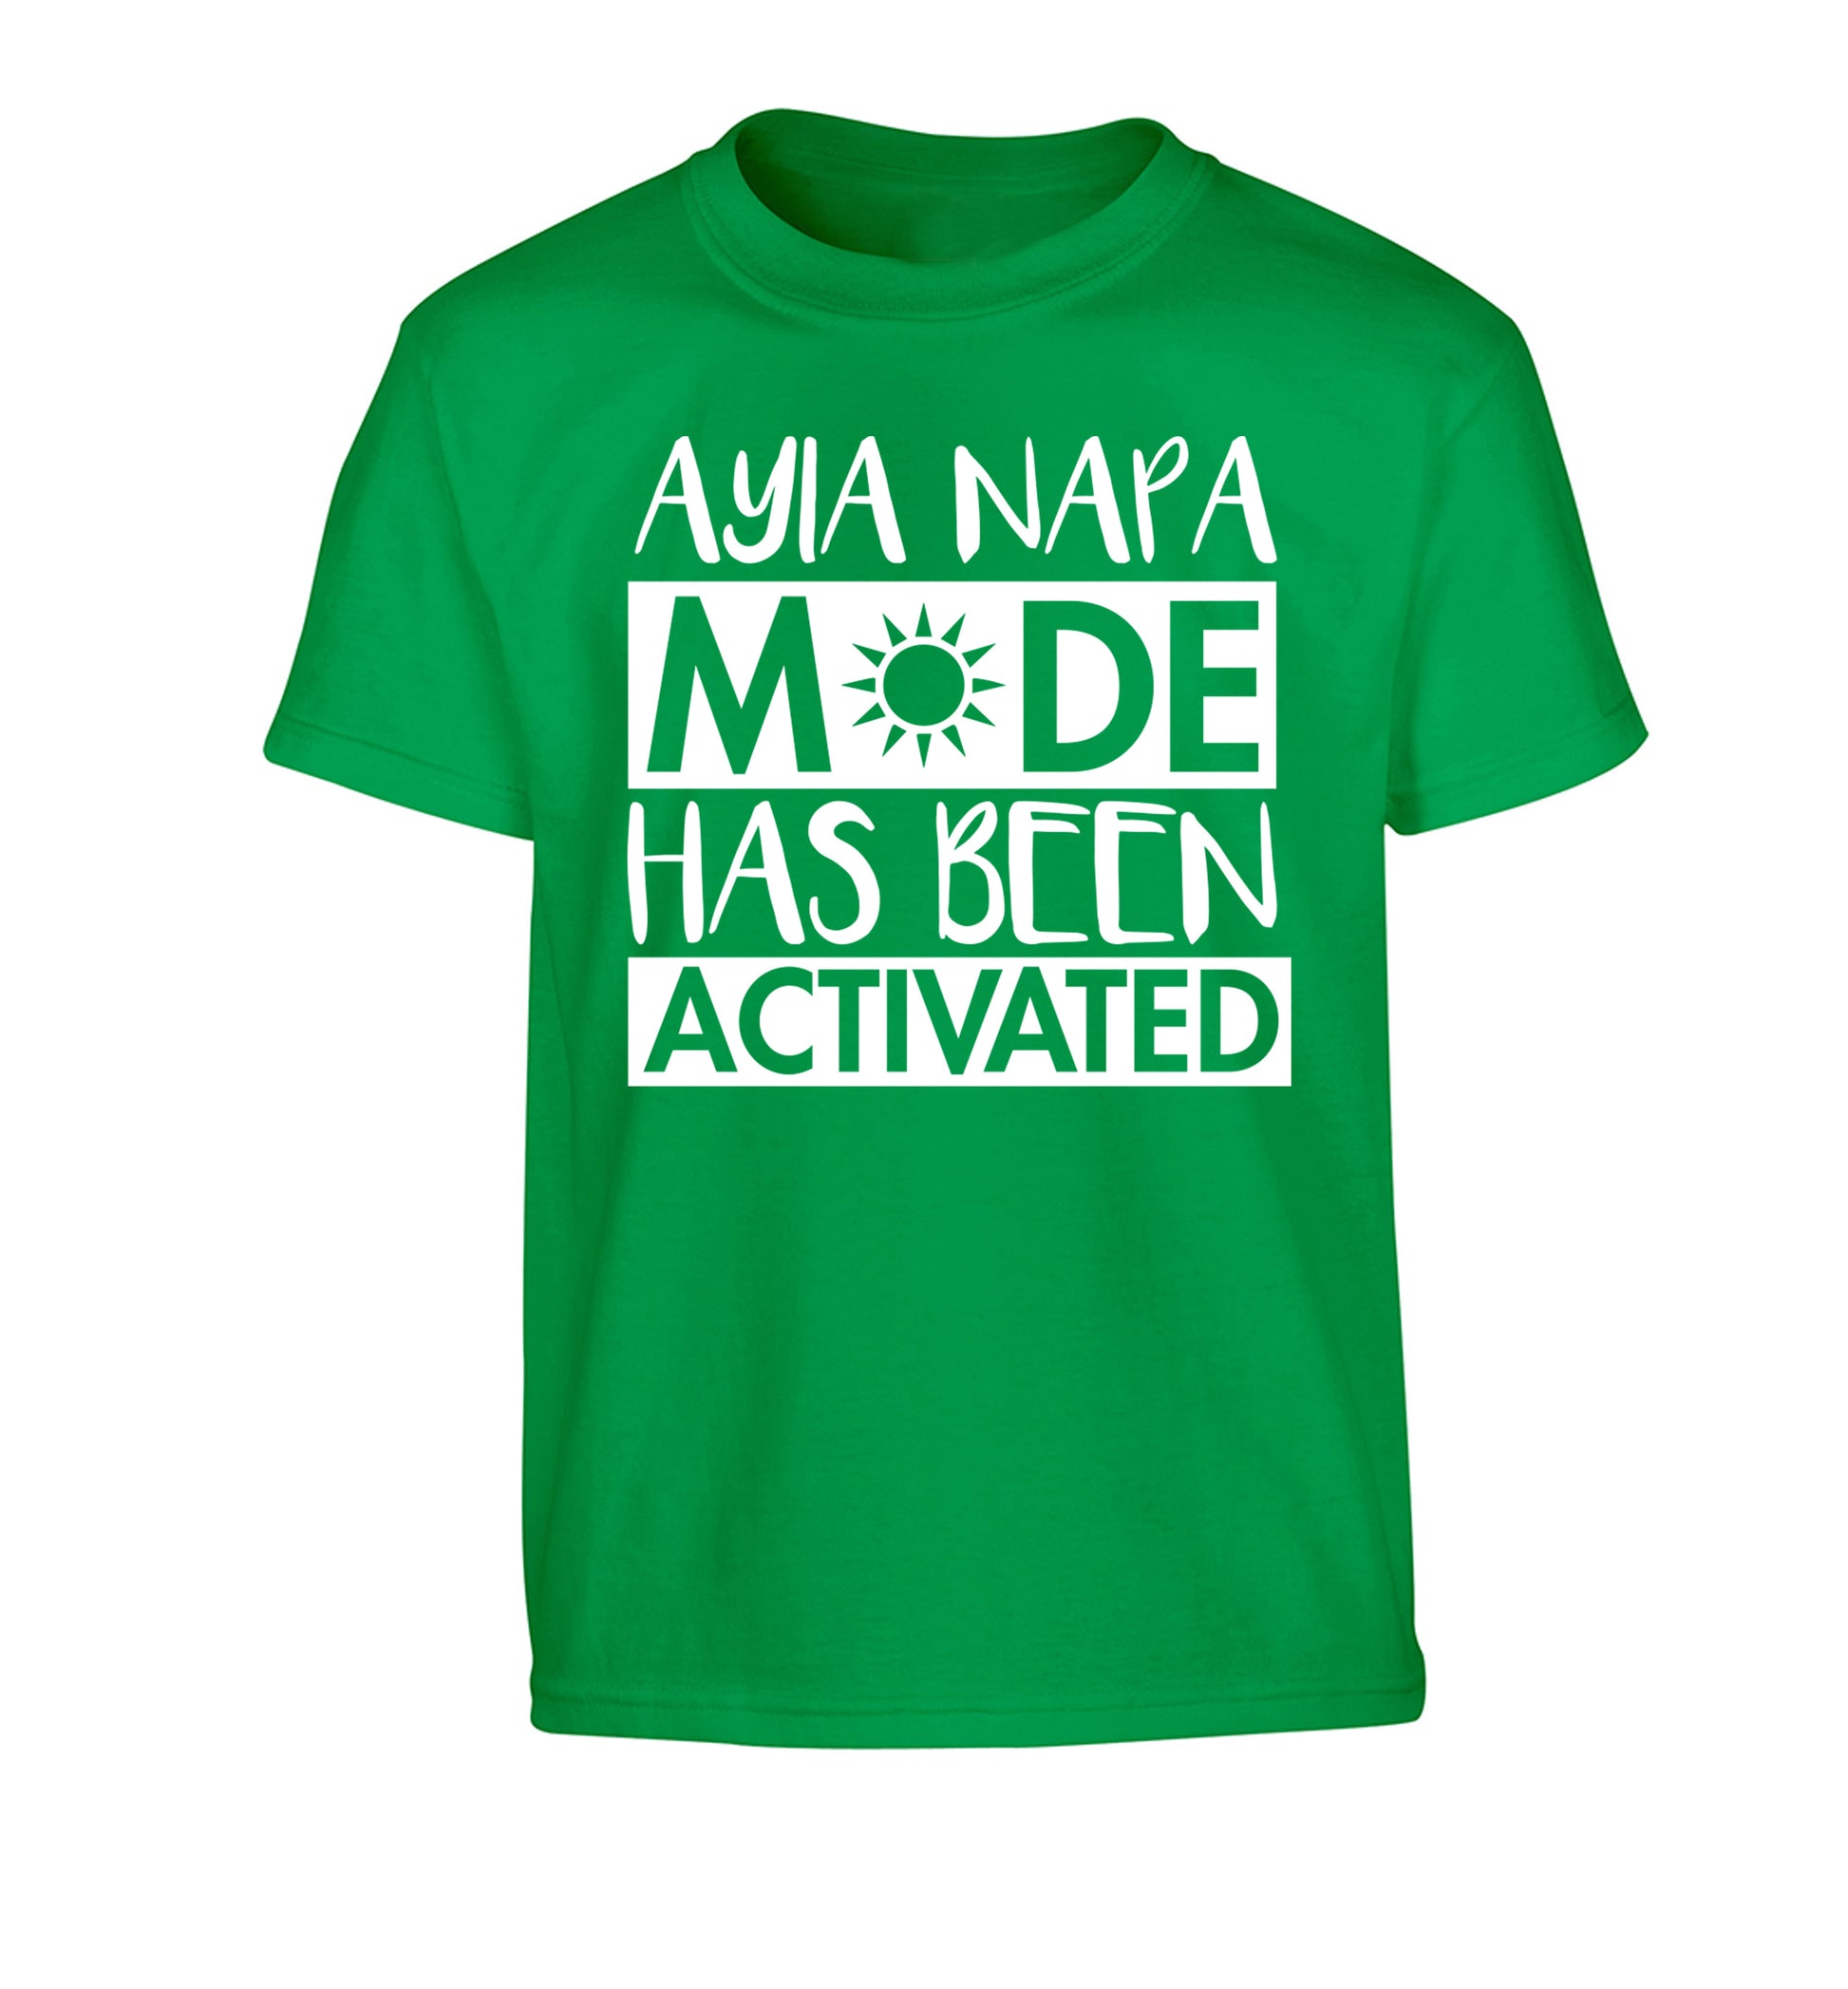 Ayia Napa mode has been activated Children's green Tshirt 12-13 Years